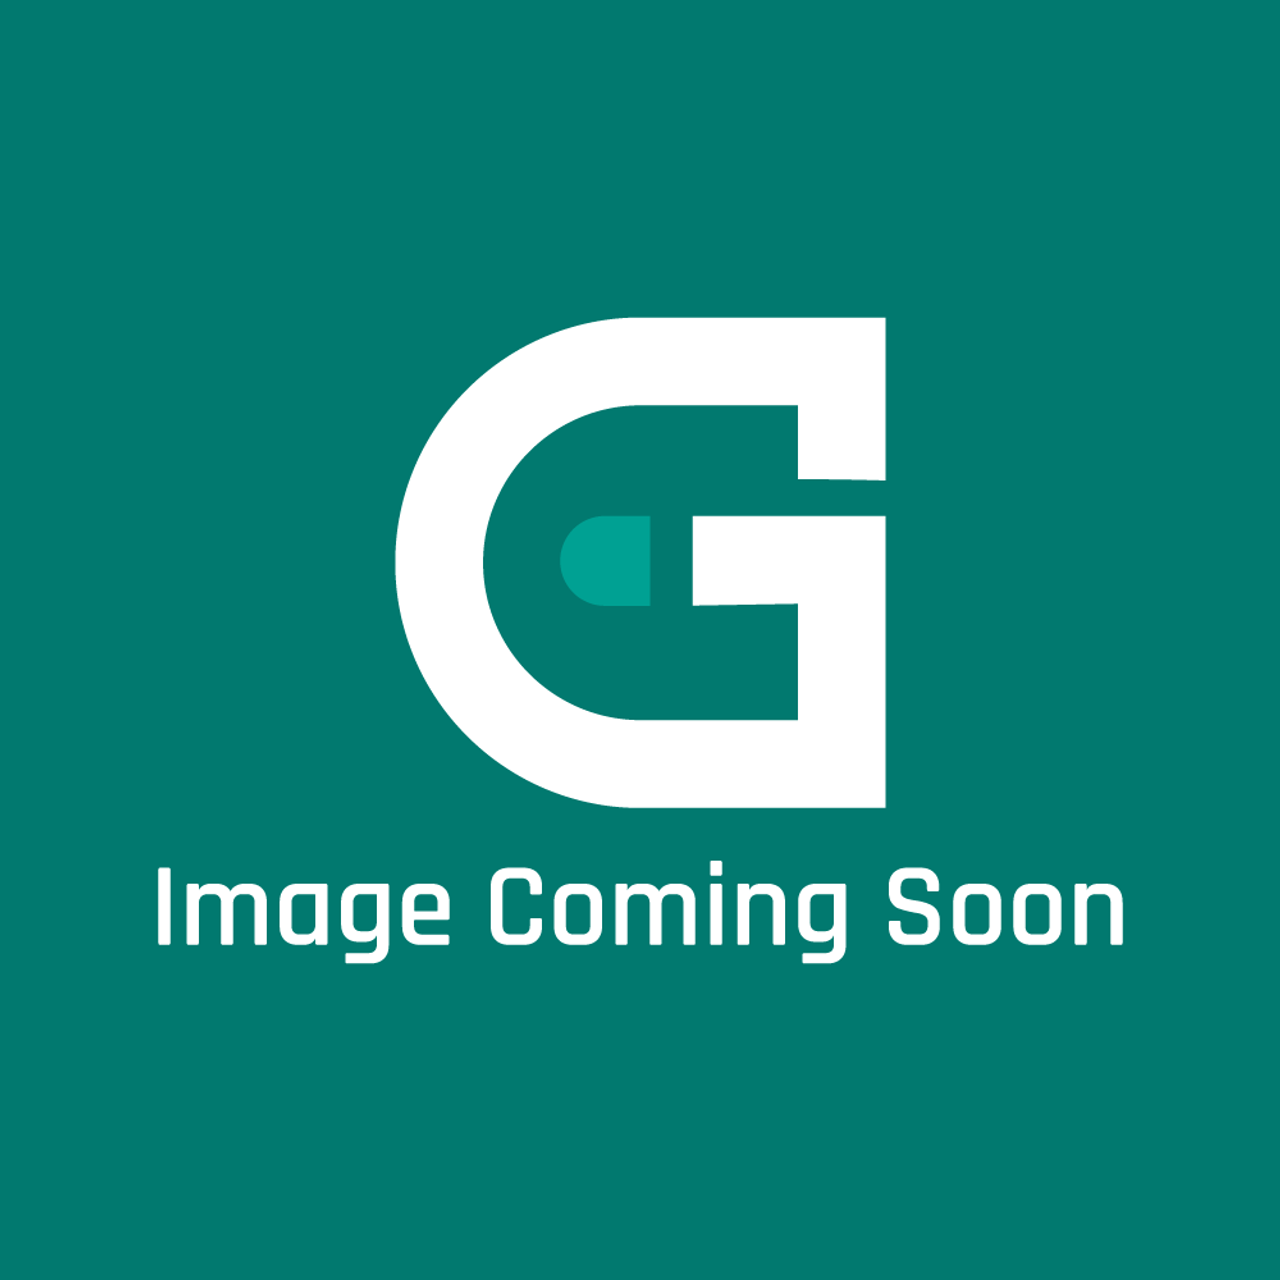 Groen Z094170 - Manifold Fitting Assembl Y - Image Coming Soon!